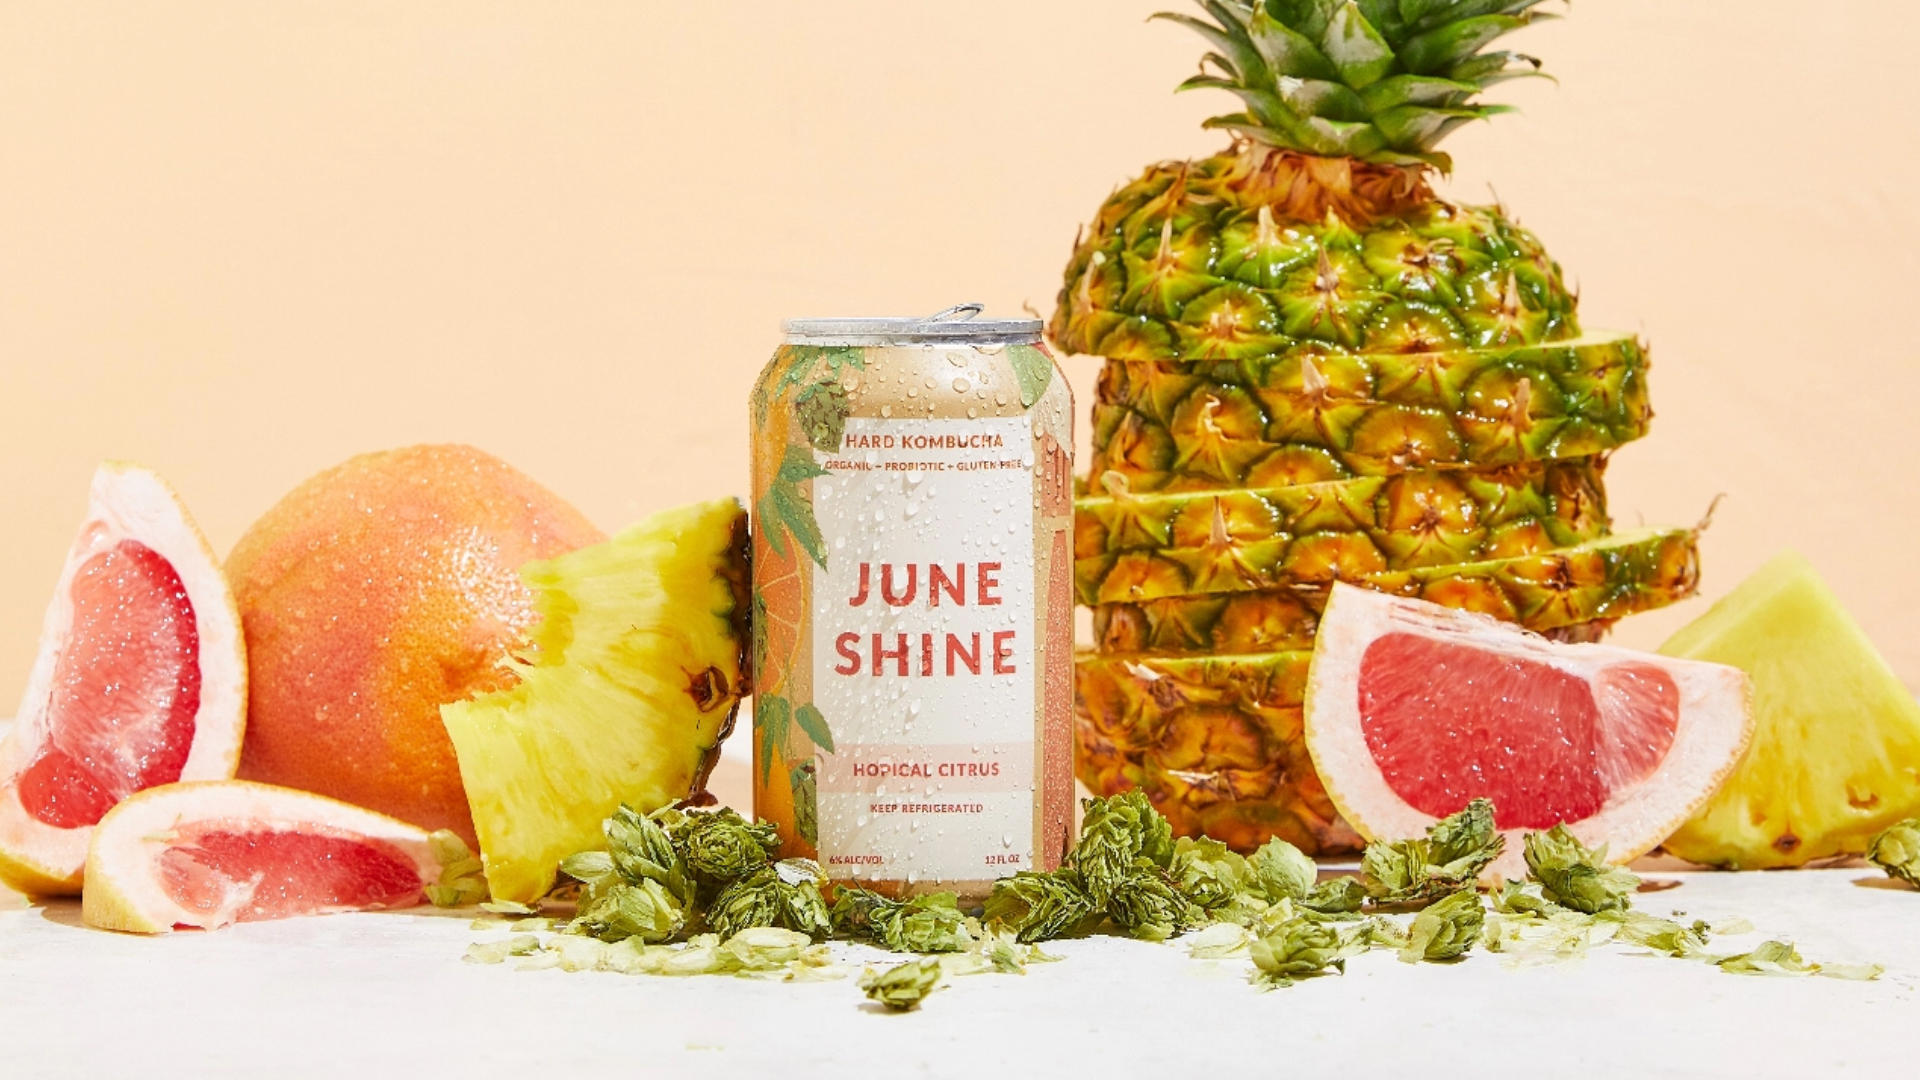 can of June Shine beside sliced pineapple and fruits